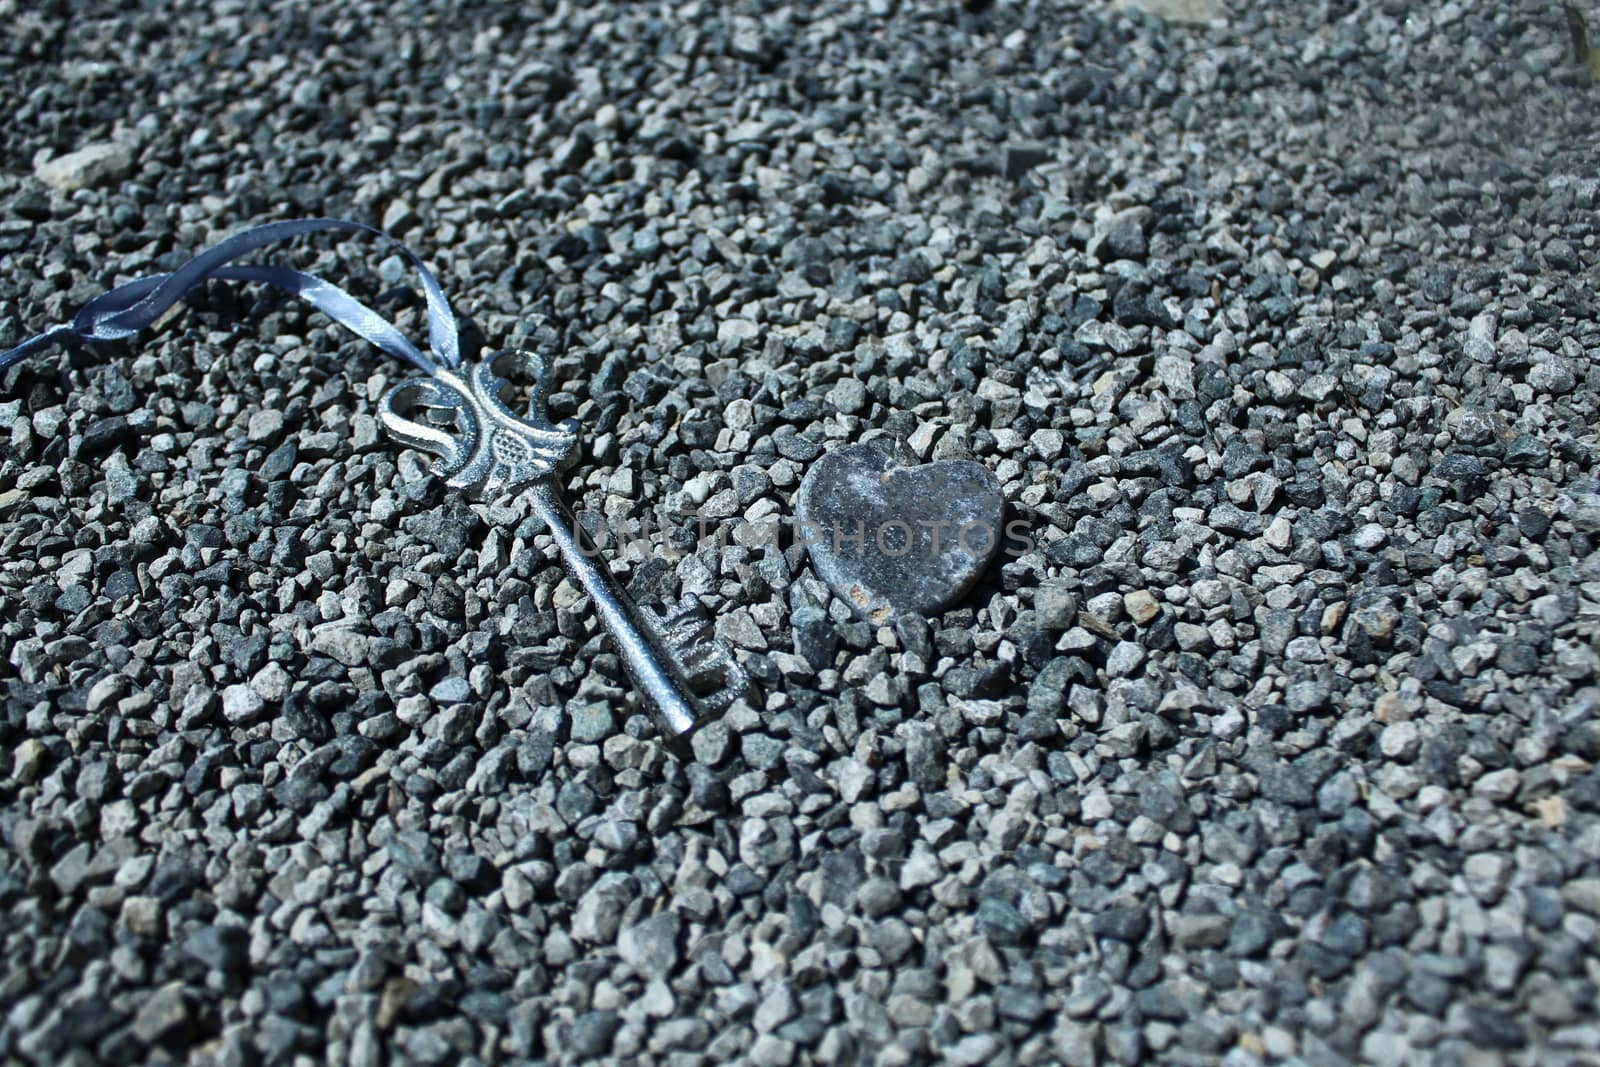 key and a heart of stone by martina_unbehauen